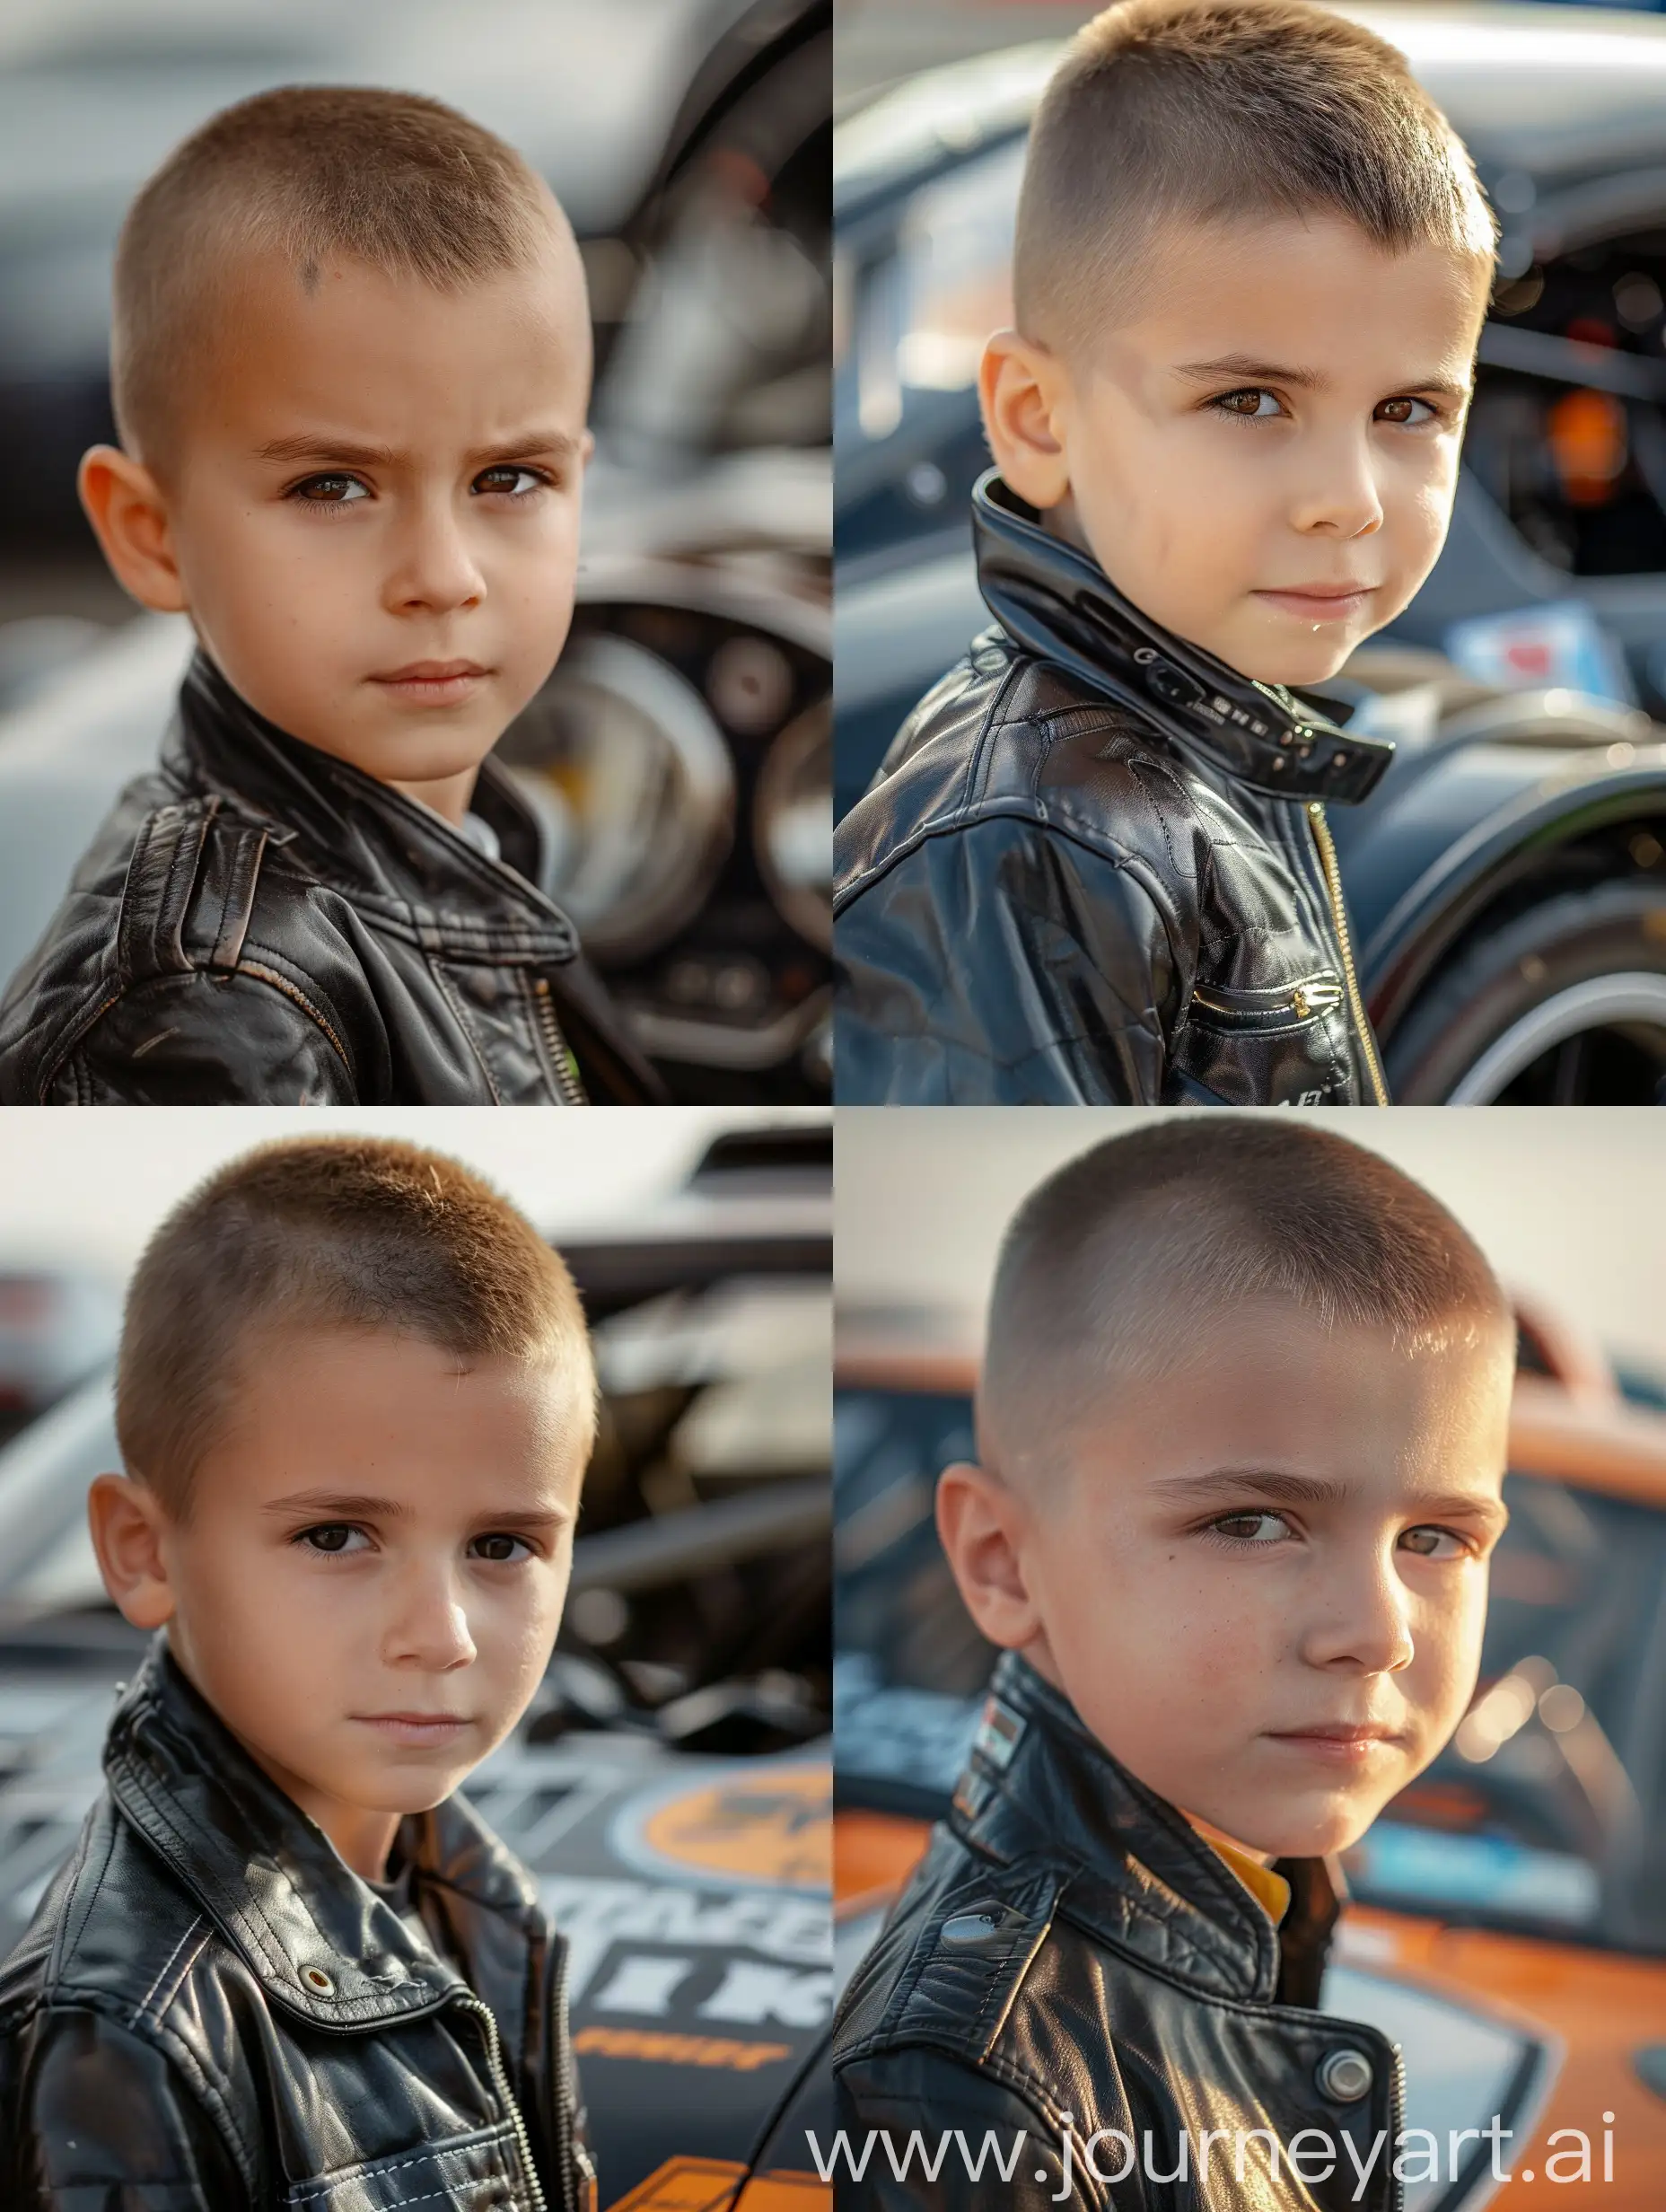 Young-Boy-Poses-with-Stylish-Race-Car-in-Hyperrealistic-Portrait